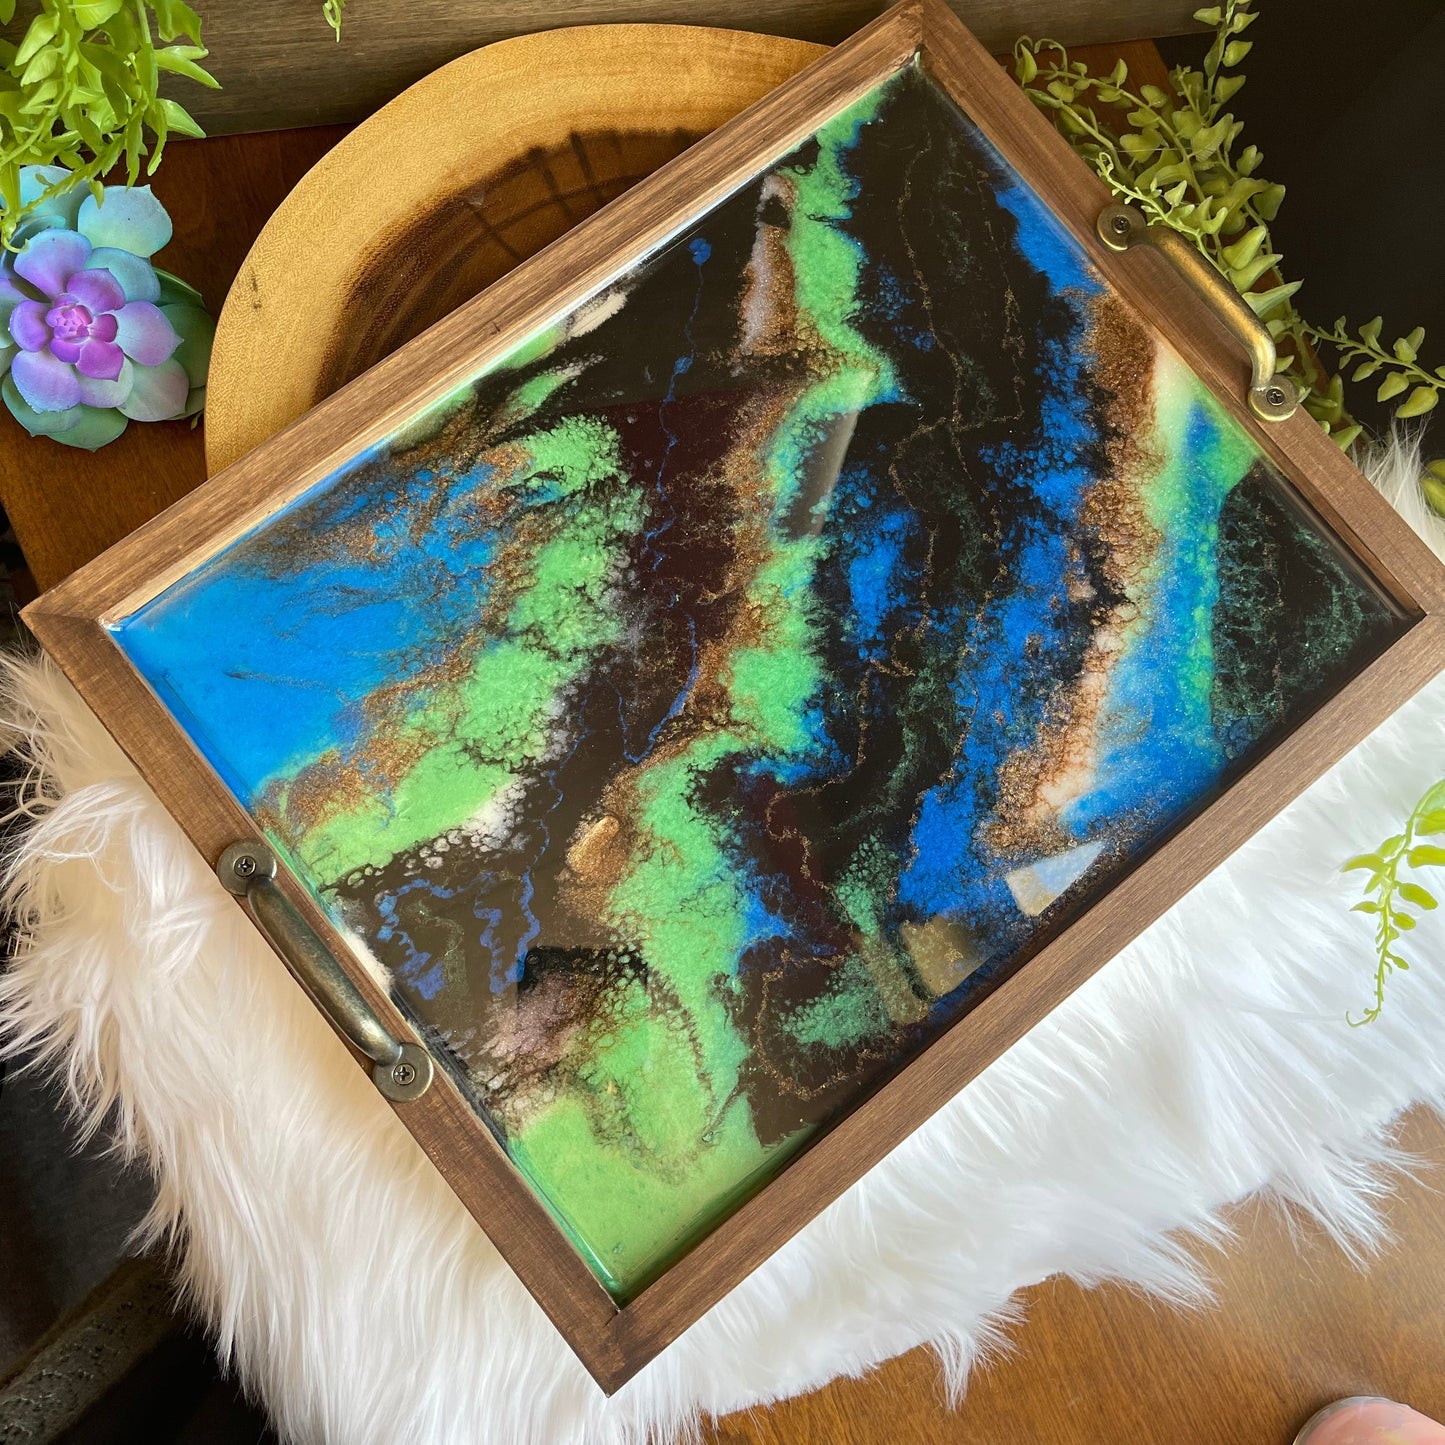 Resin Tray Class - 9/14 @ 6PM